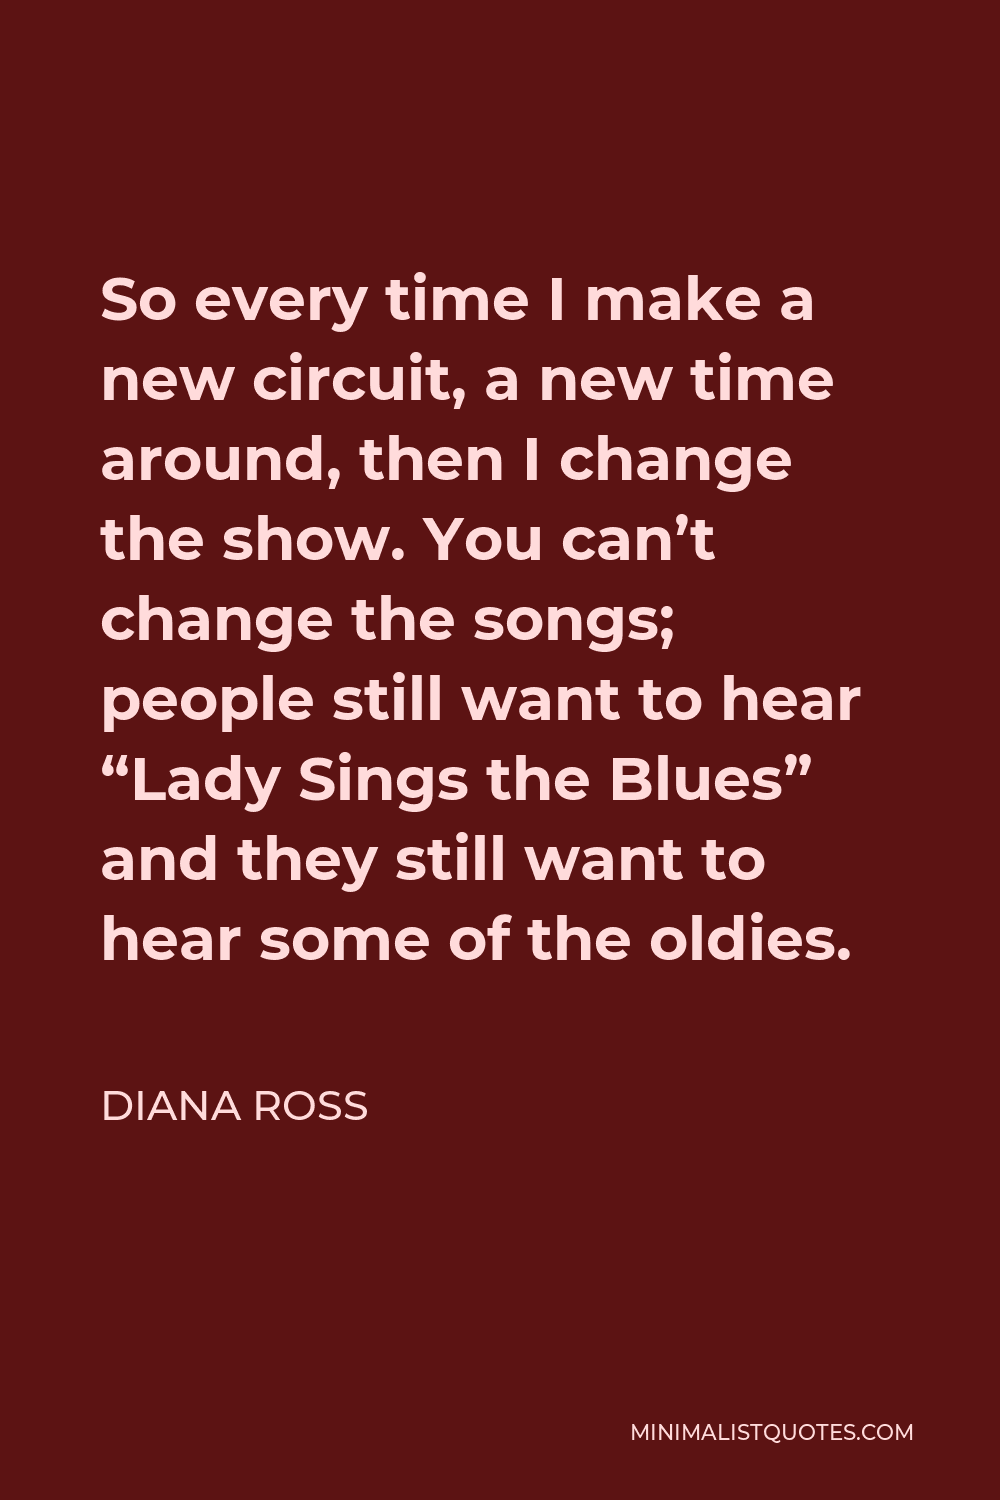 Diana Ross Quote - So every time I make a new circuit, a new time around, then I change the show. You can’t change the songs; people still want to hear “Lady Sings the Blues” and they still want to hear some of the oldies.